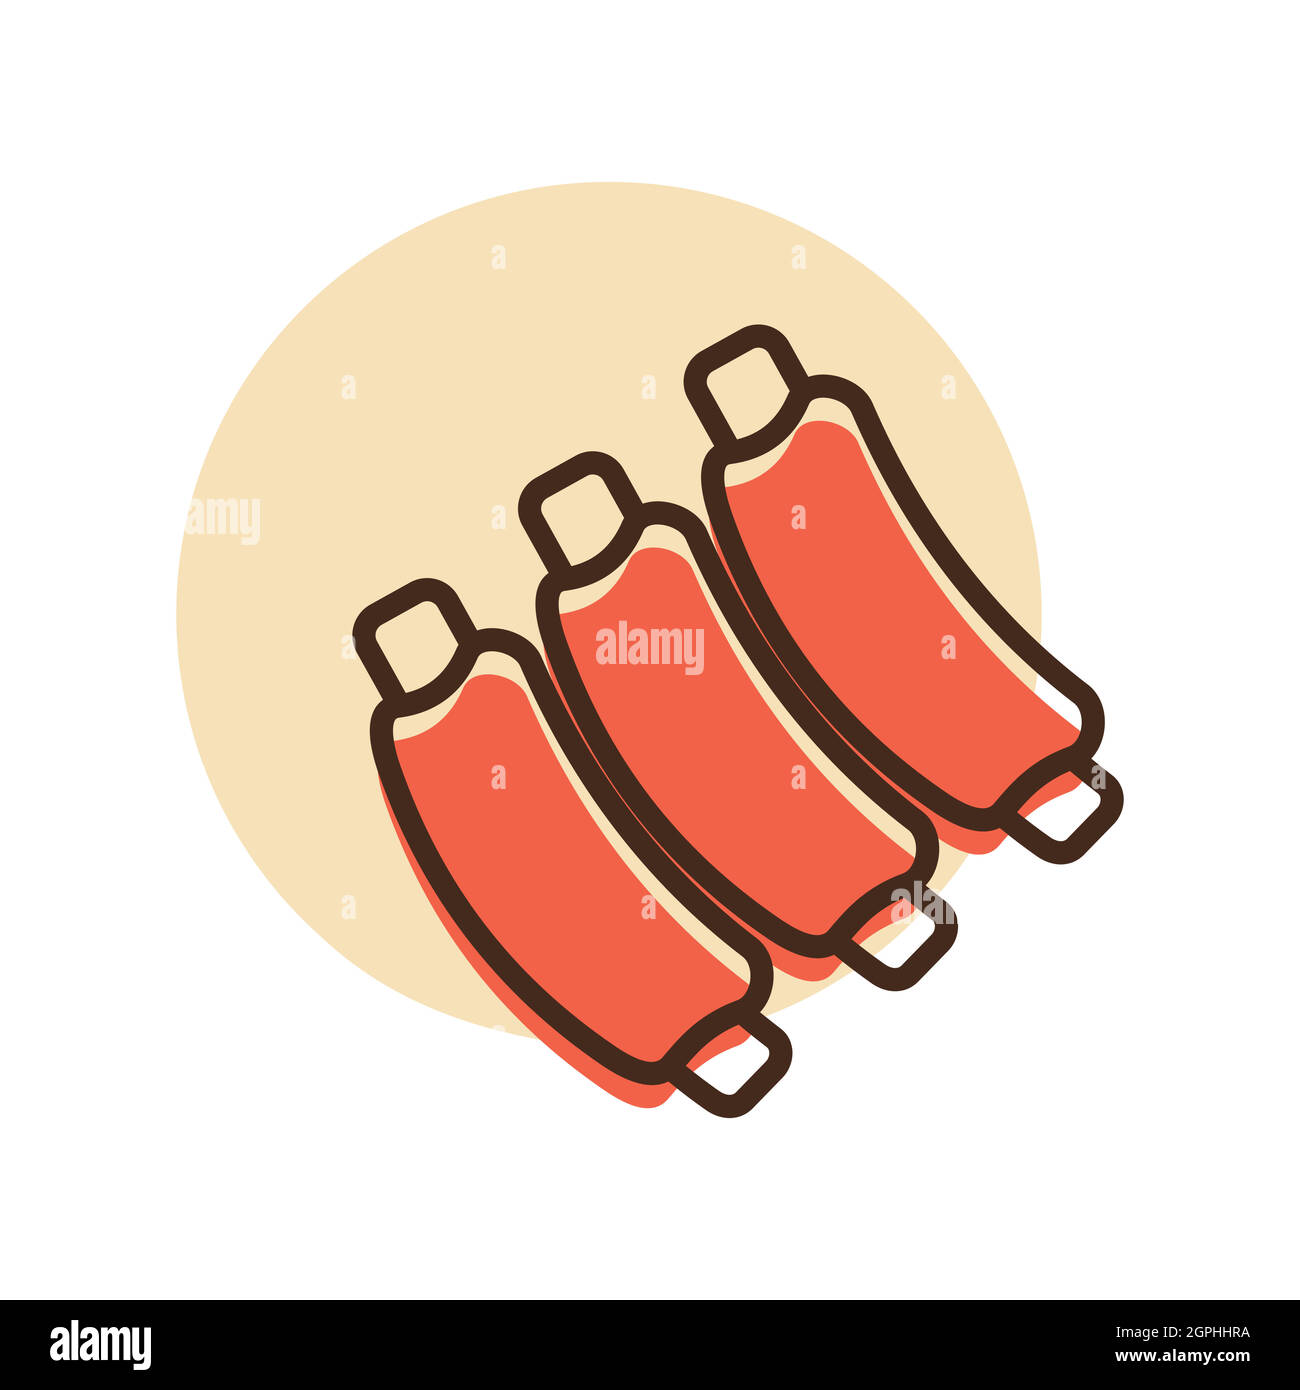 Ribs food meat vector icon Stock Vector